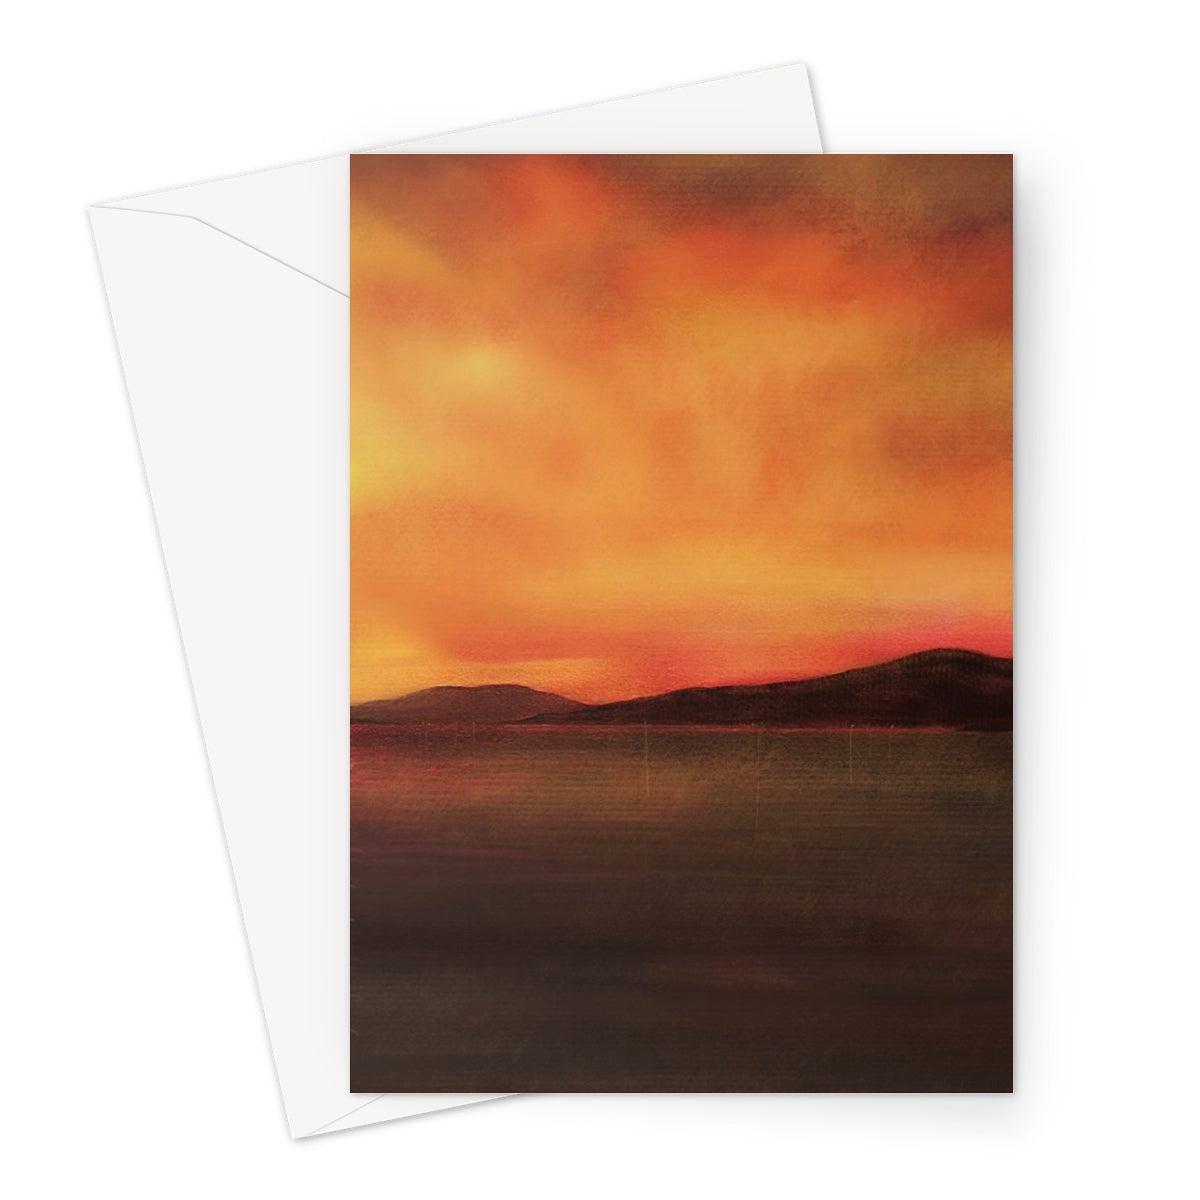 Harris Sunset Art Gifts Greeting Card-Greetings Cards-Hebridean Islands Art Gallery-A5 Portrait-1 Card-Paintings, Prints, Homeware, Art Gifts From Scotland By Scottish Artist Kevin Hunter